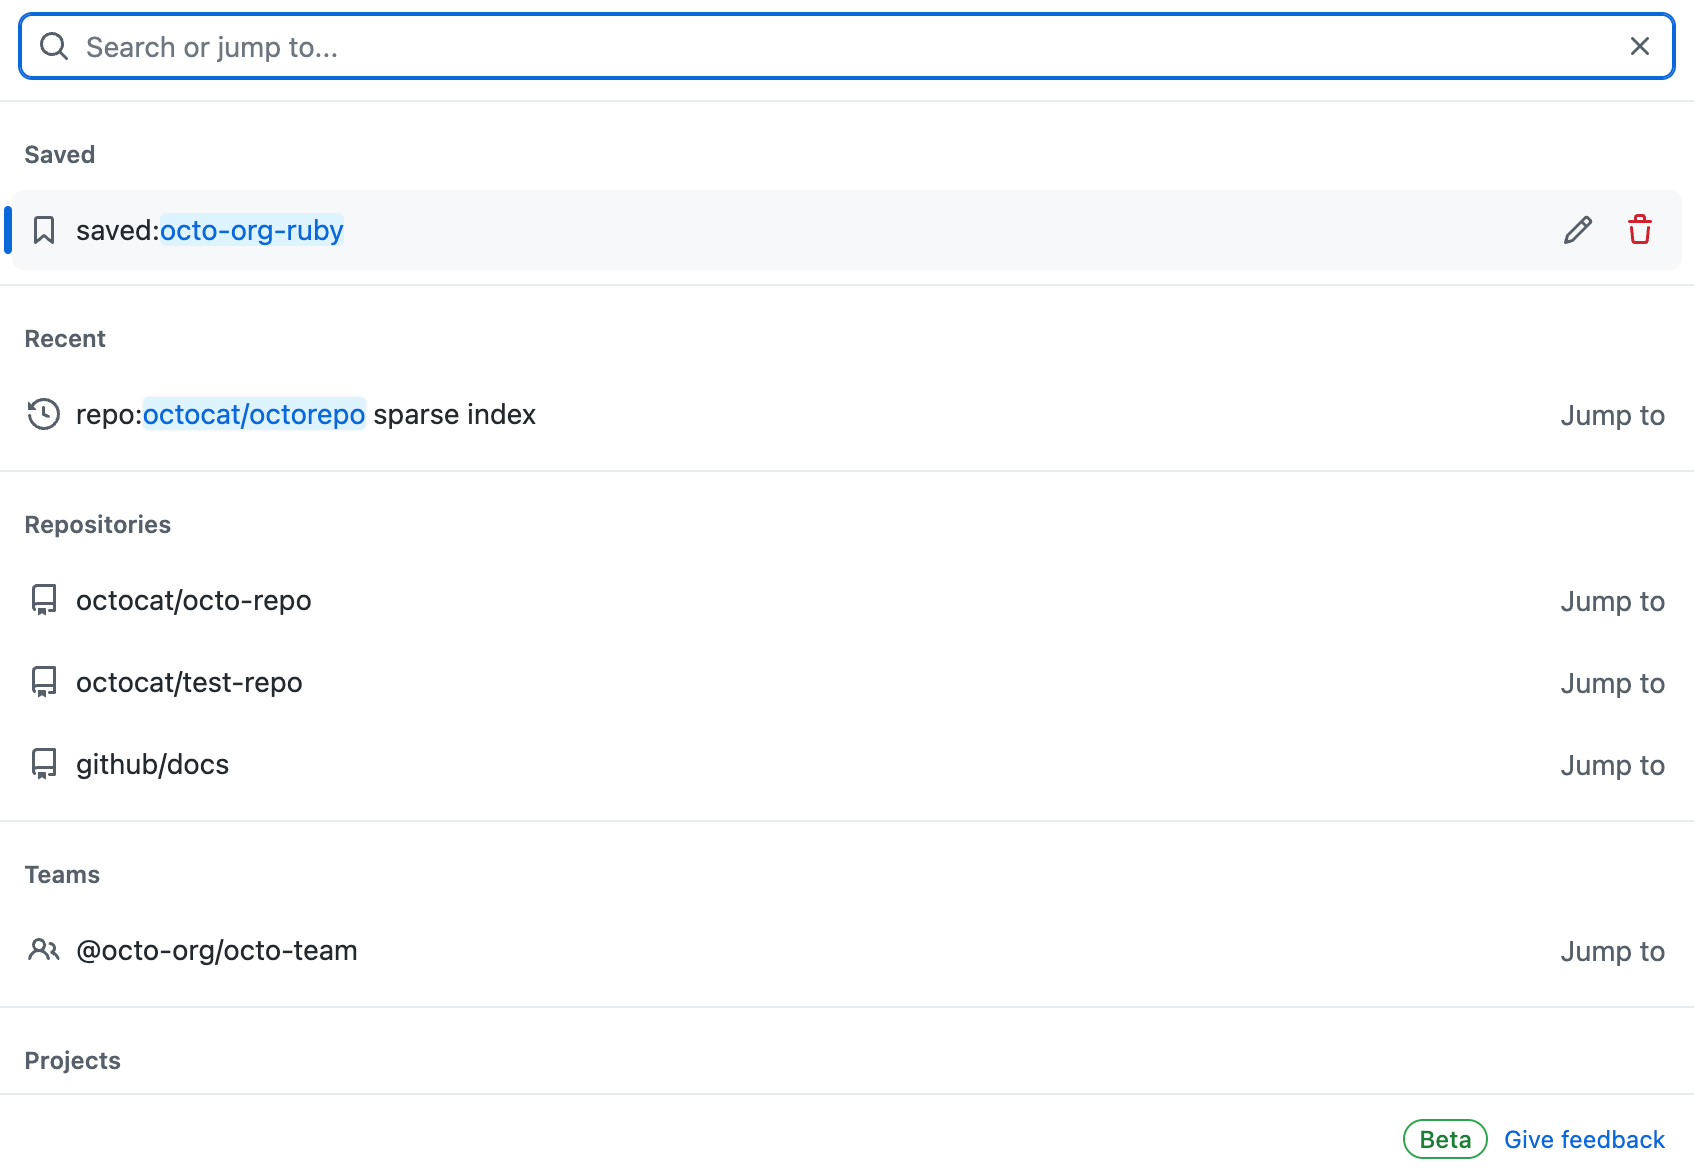 Screenshot of the GitHub search bar. There is a list of search suggestions by category below the search bar.